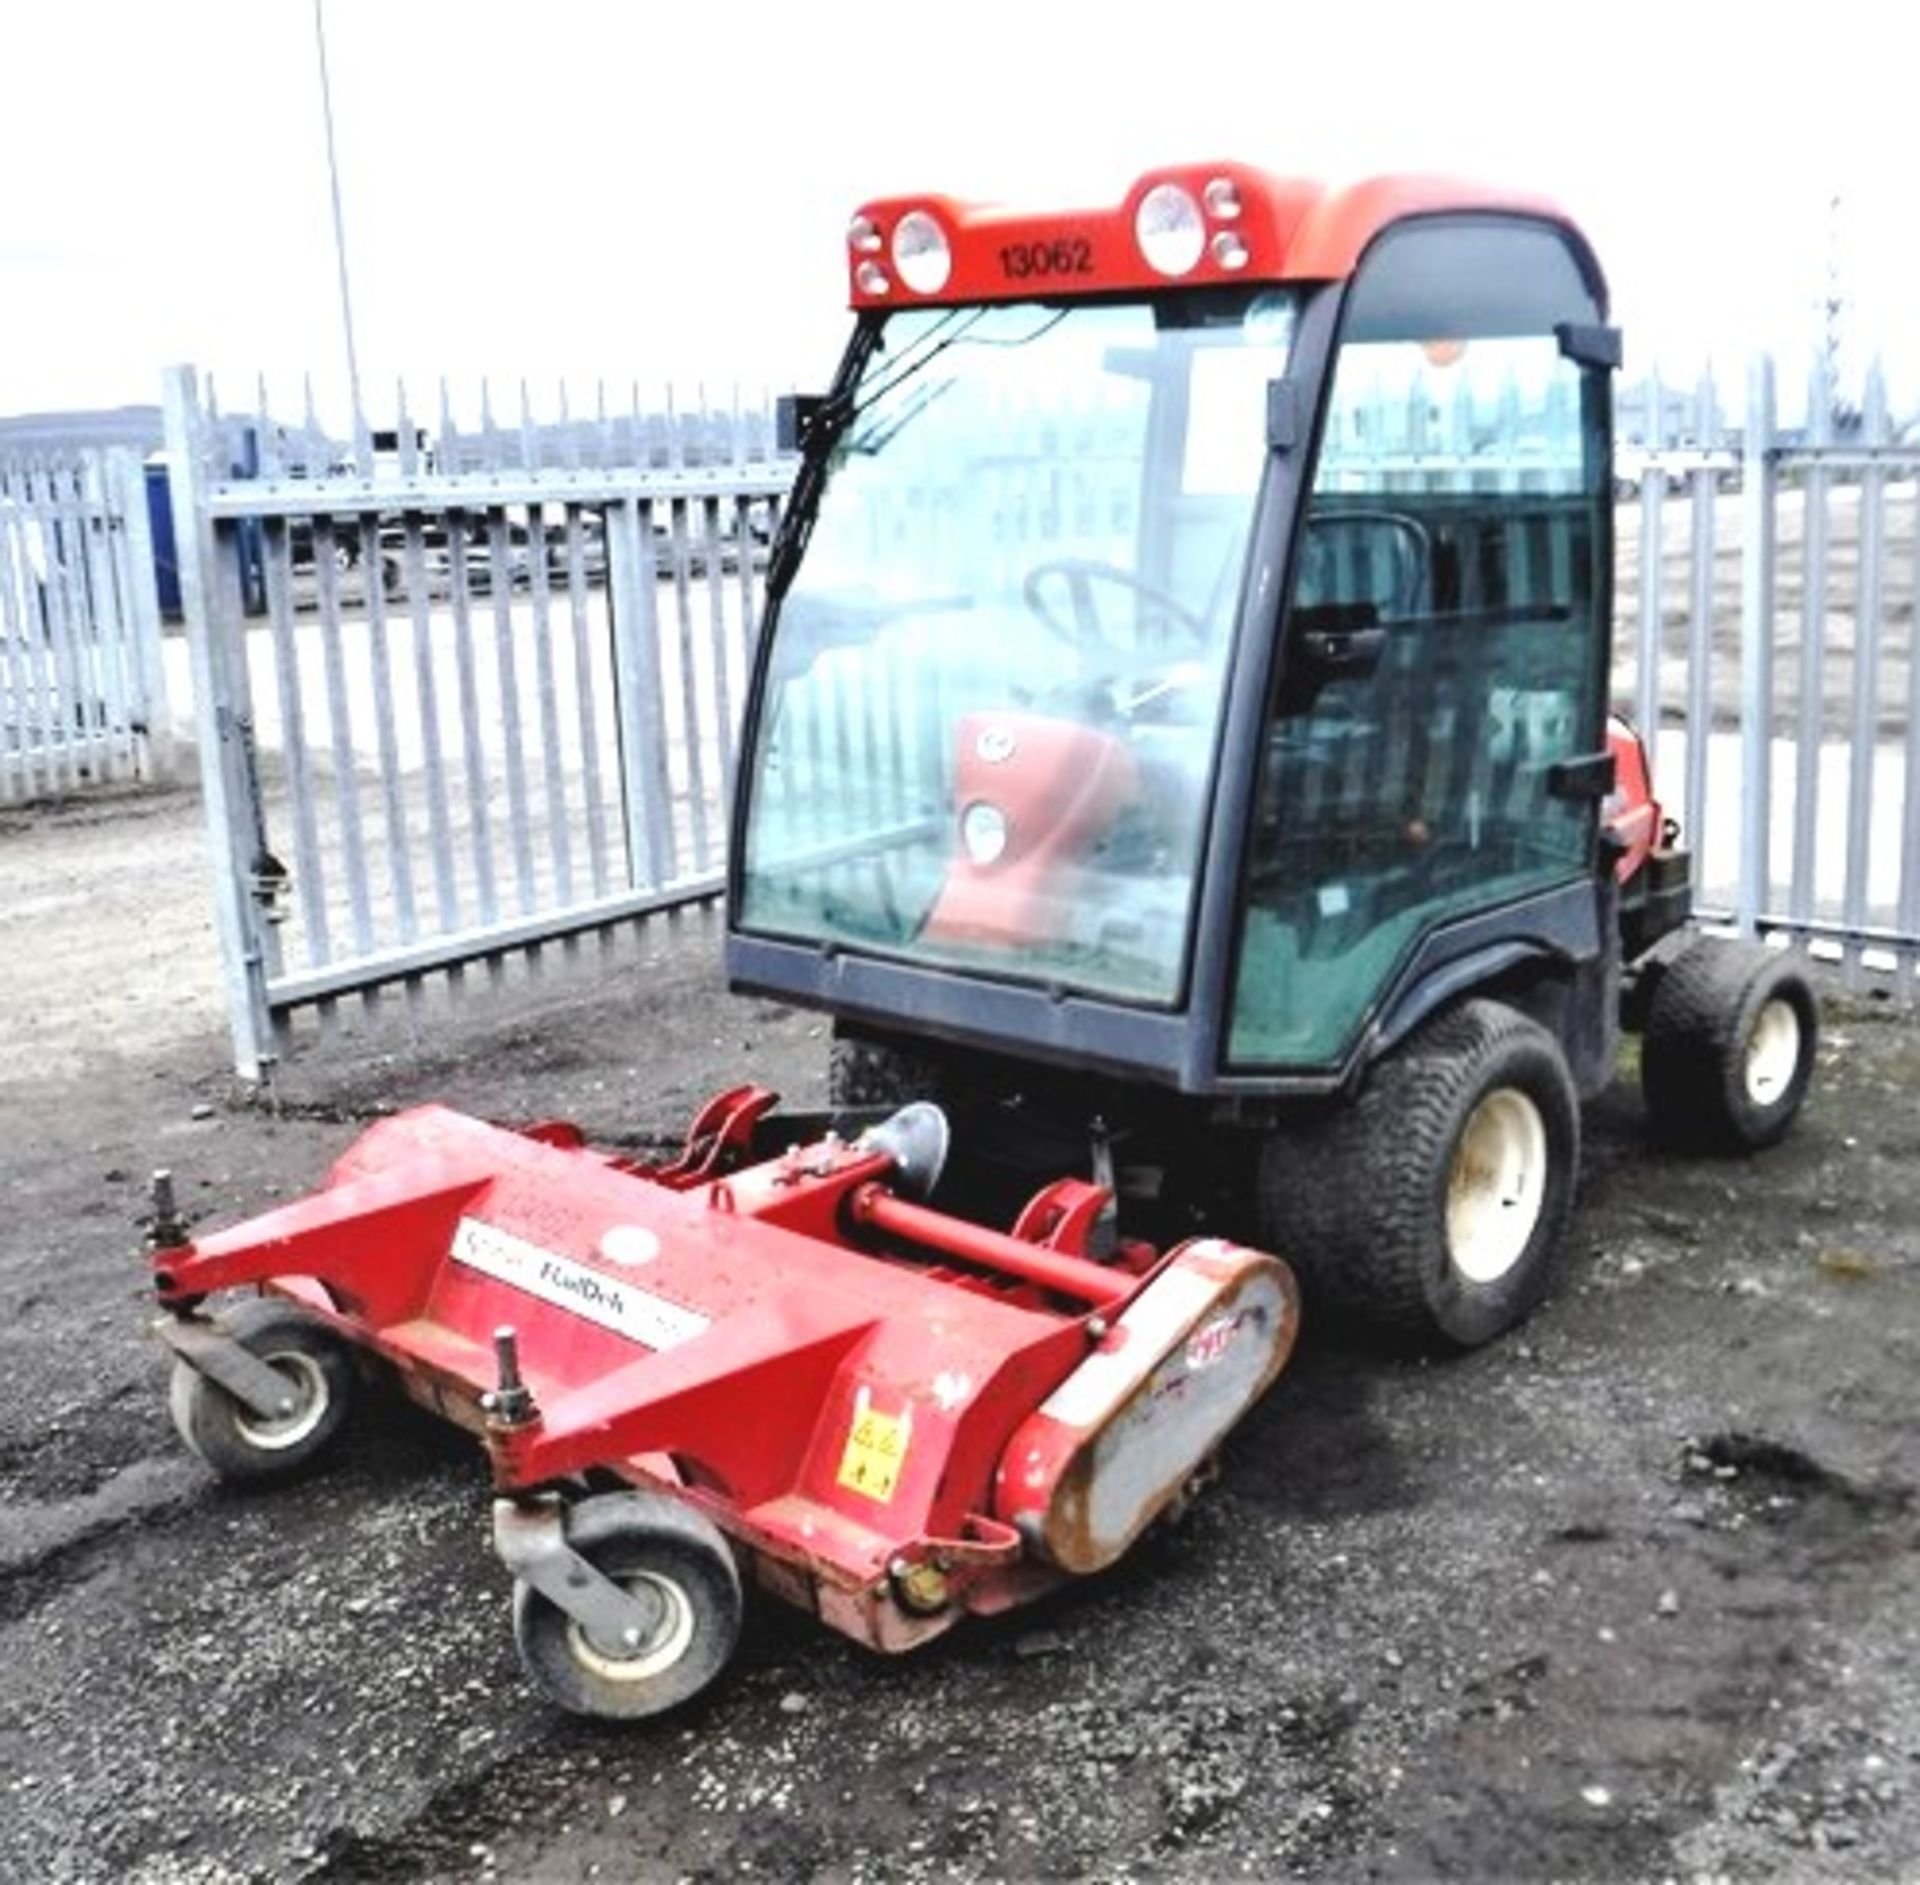 2012 KUBOTA 3680FC. Reg No SP12 AHL c/w flaildeck 155 out front mower. 1545hrs (not verified). This